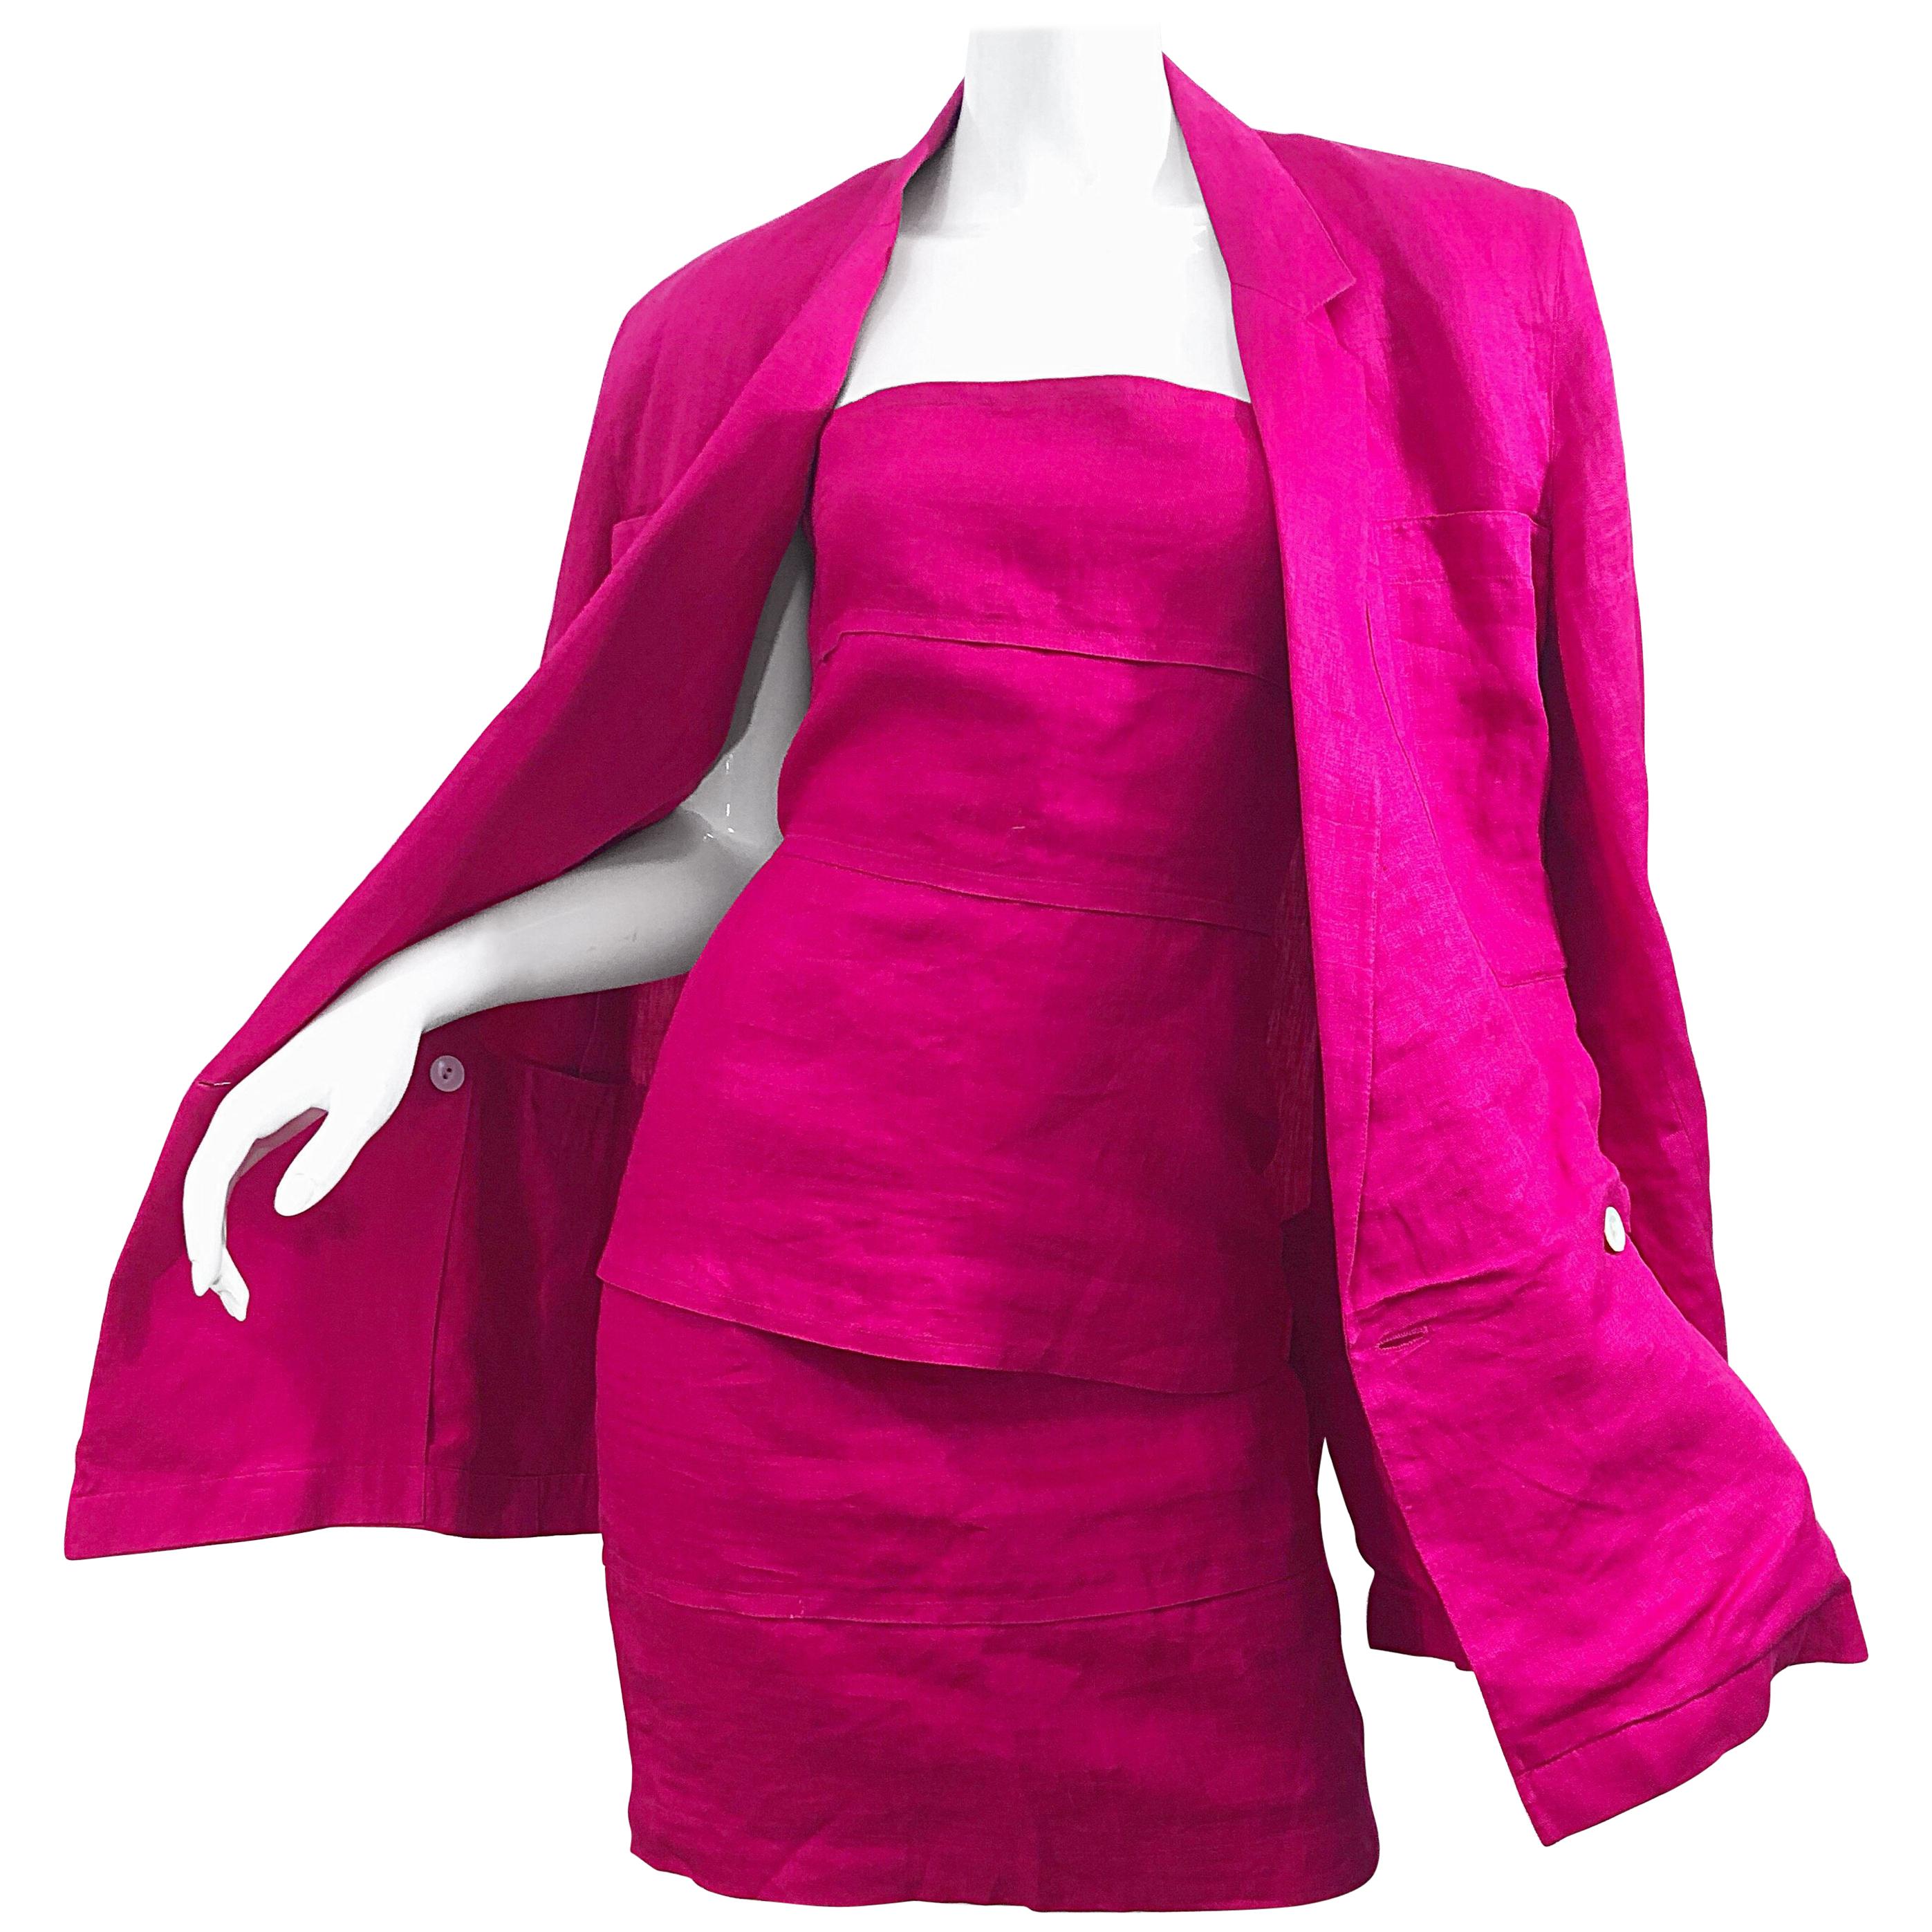 Gianni Versace for Genny 1980s Size 8 / 10 Hot Pink Linen Dress and Jacket Set